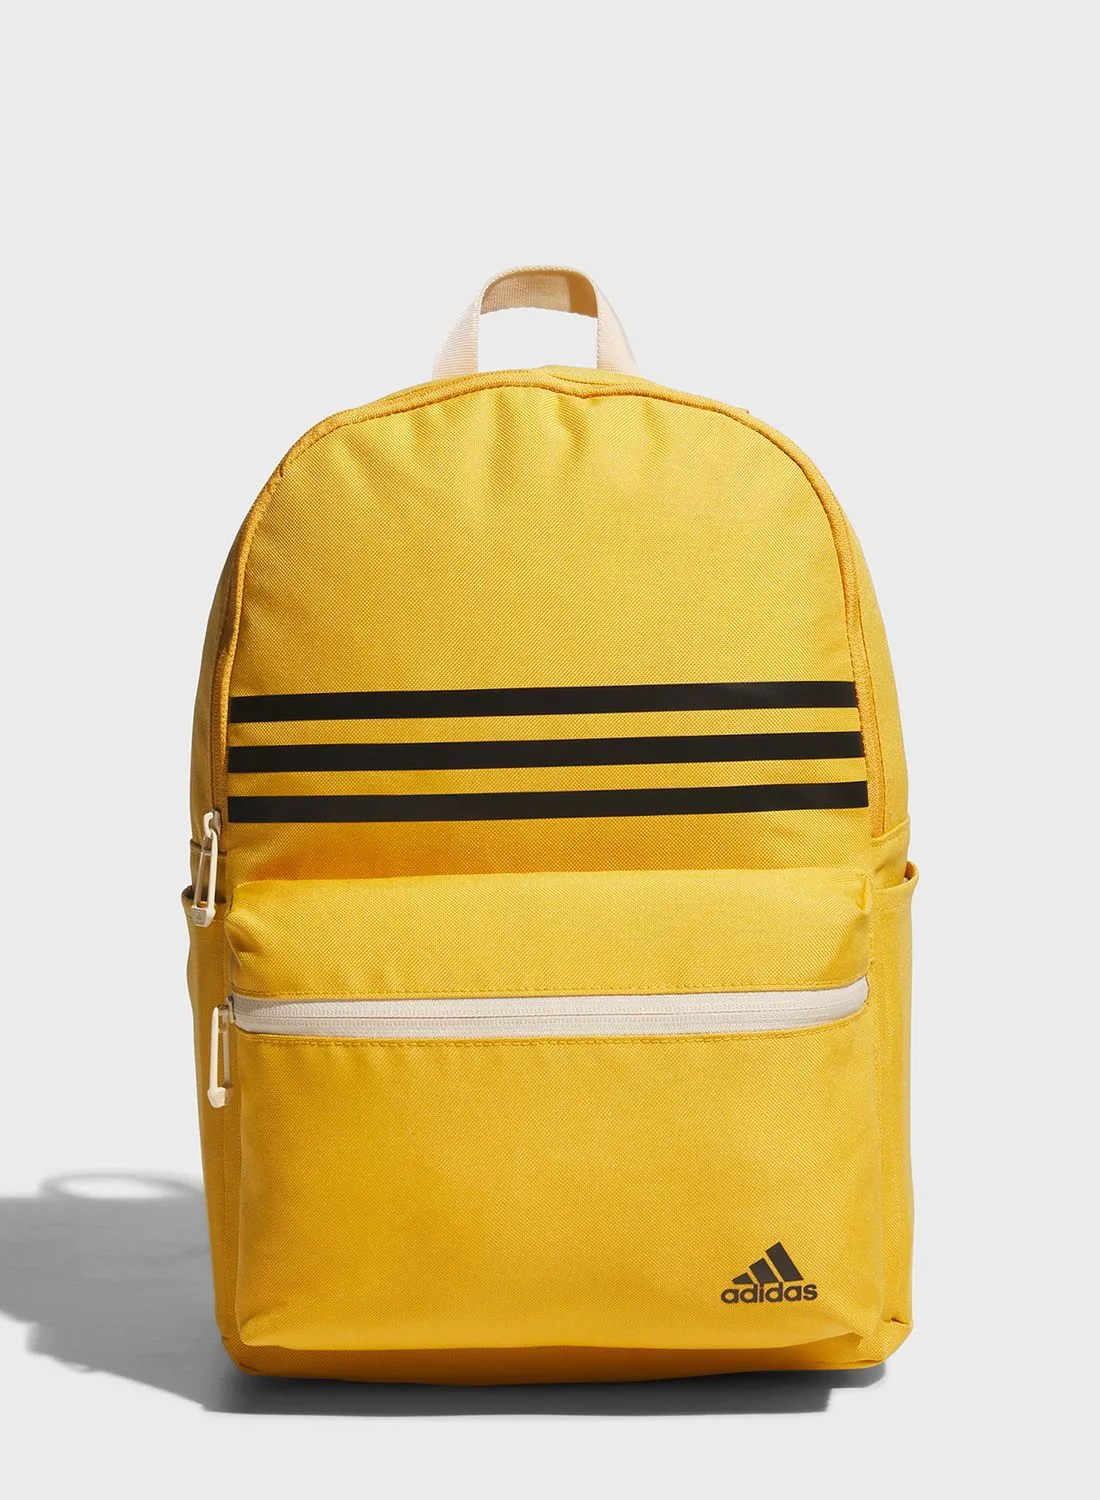 Adidas Little Classic Backpack